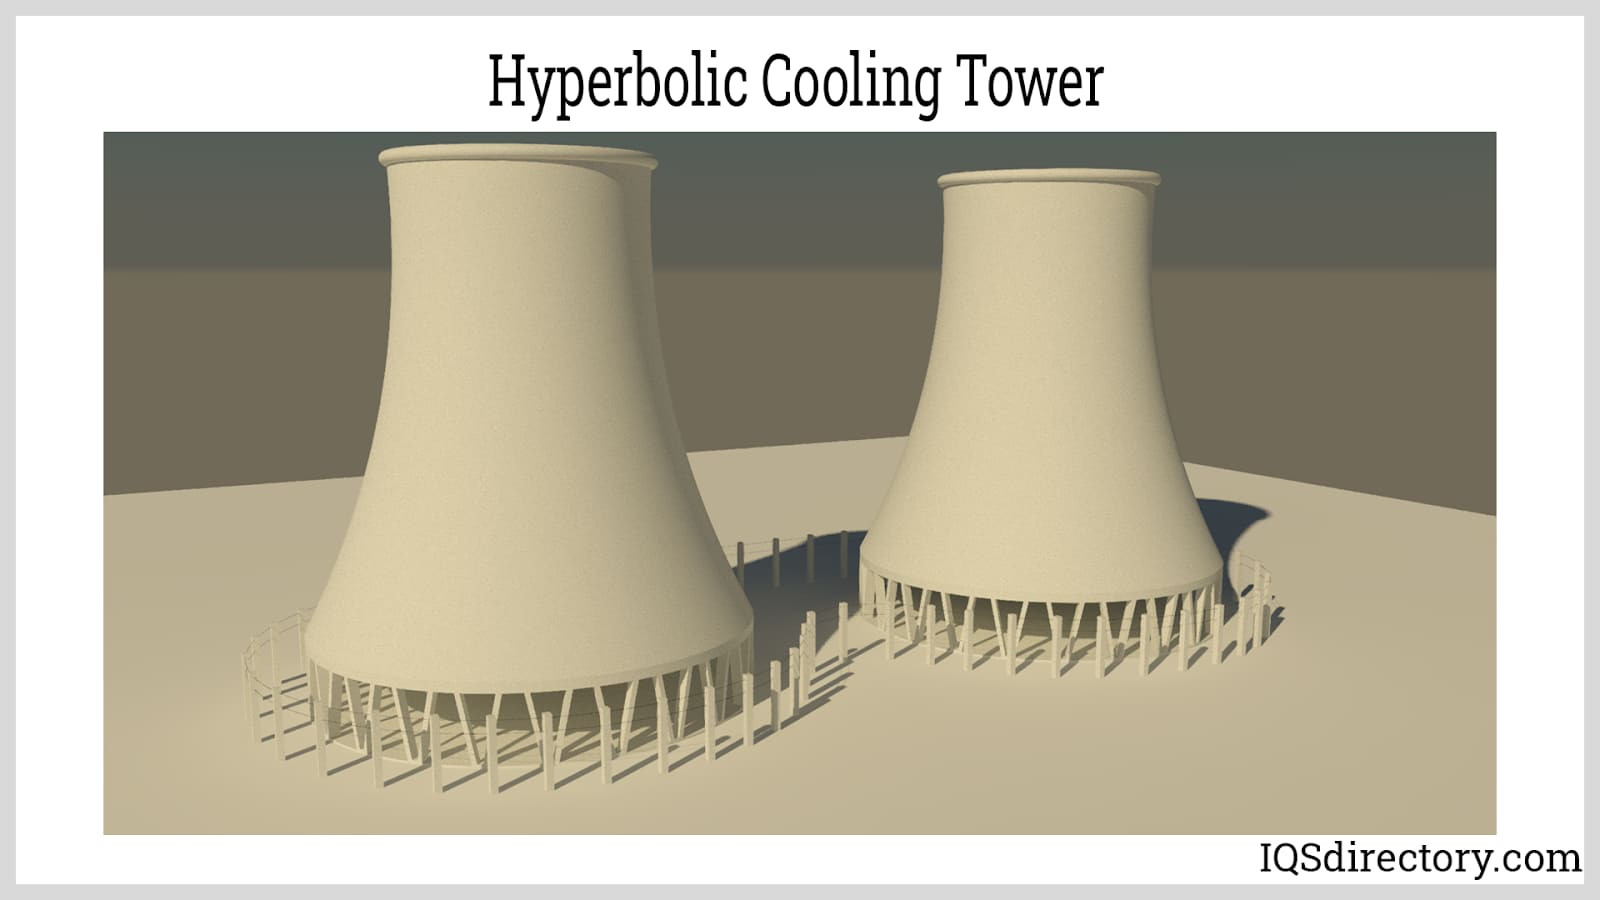 Hyperbolic Cooling Towers